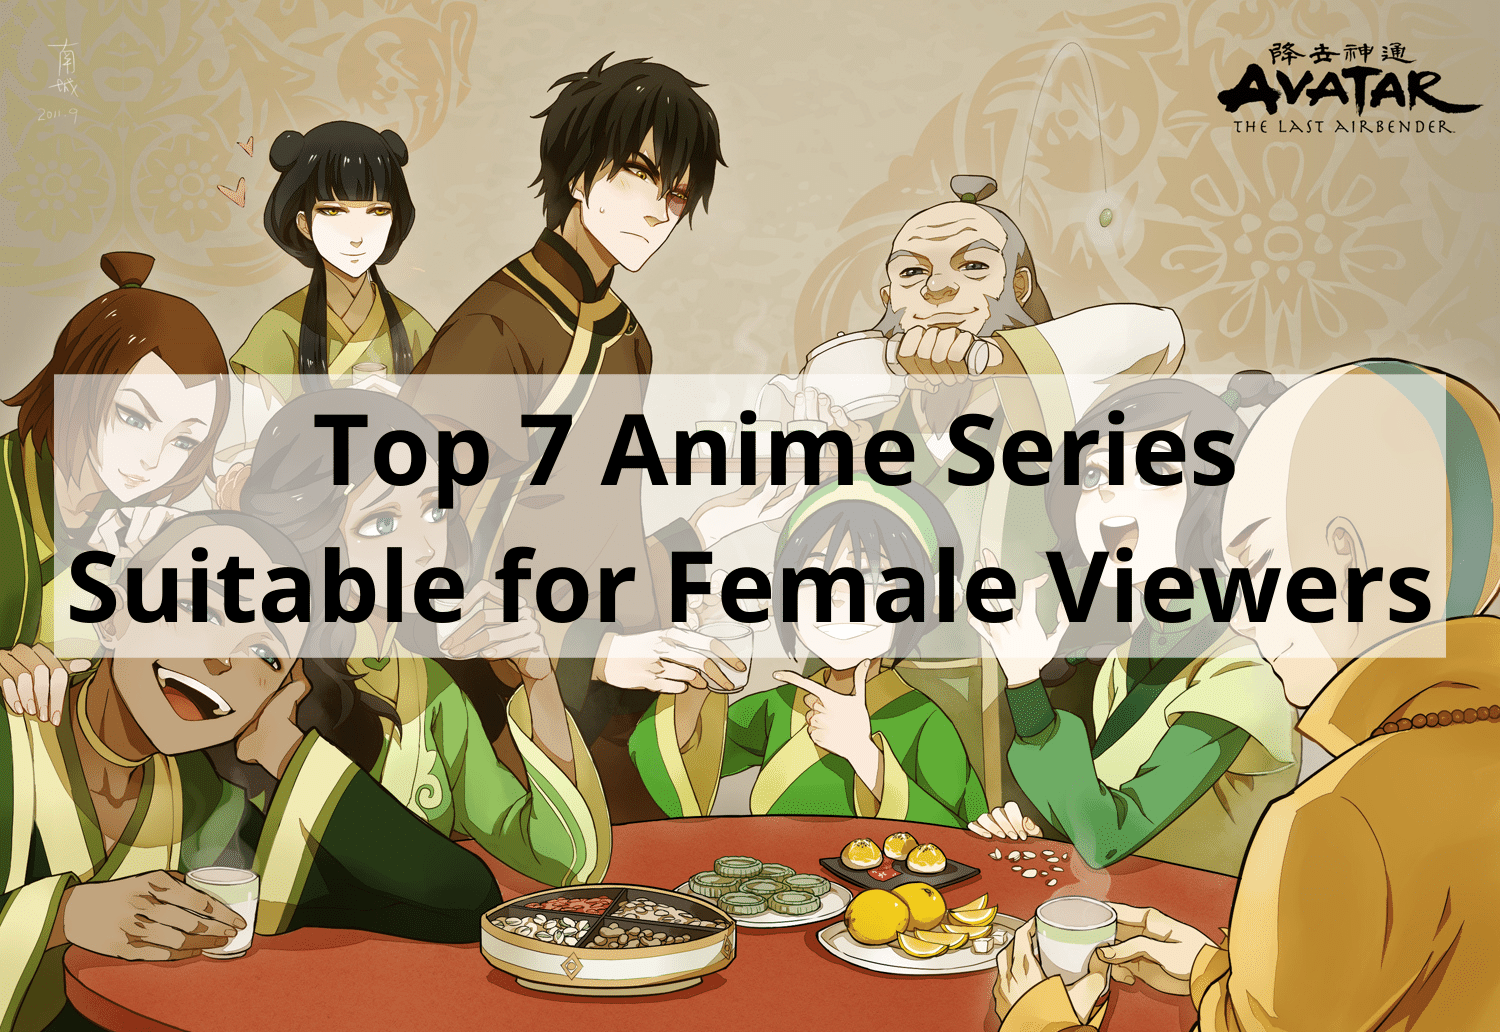 Top 7 Anime Series Suitable for Female Viewers